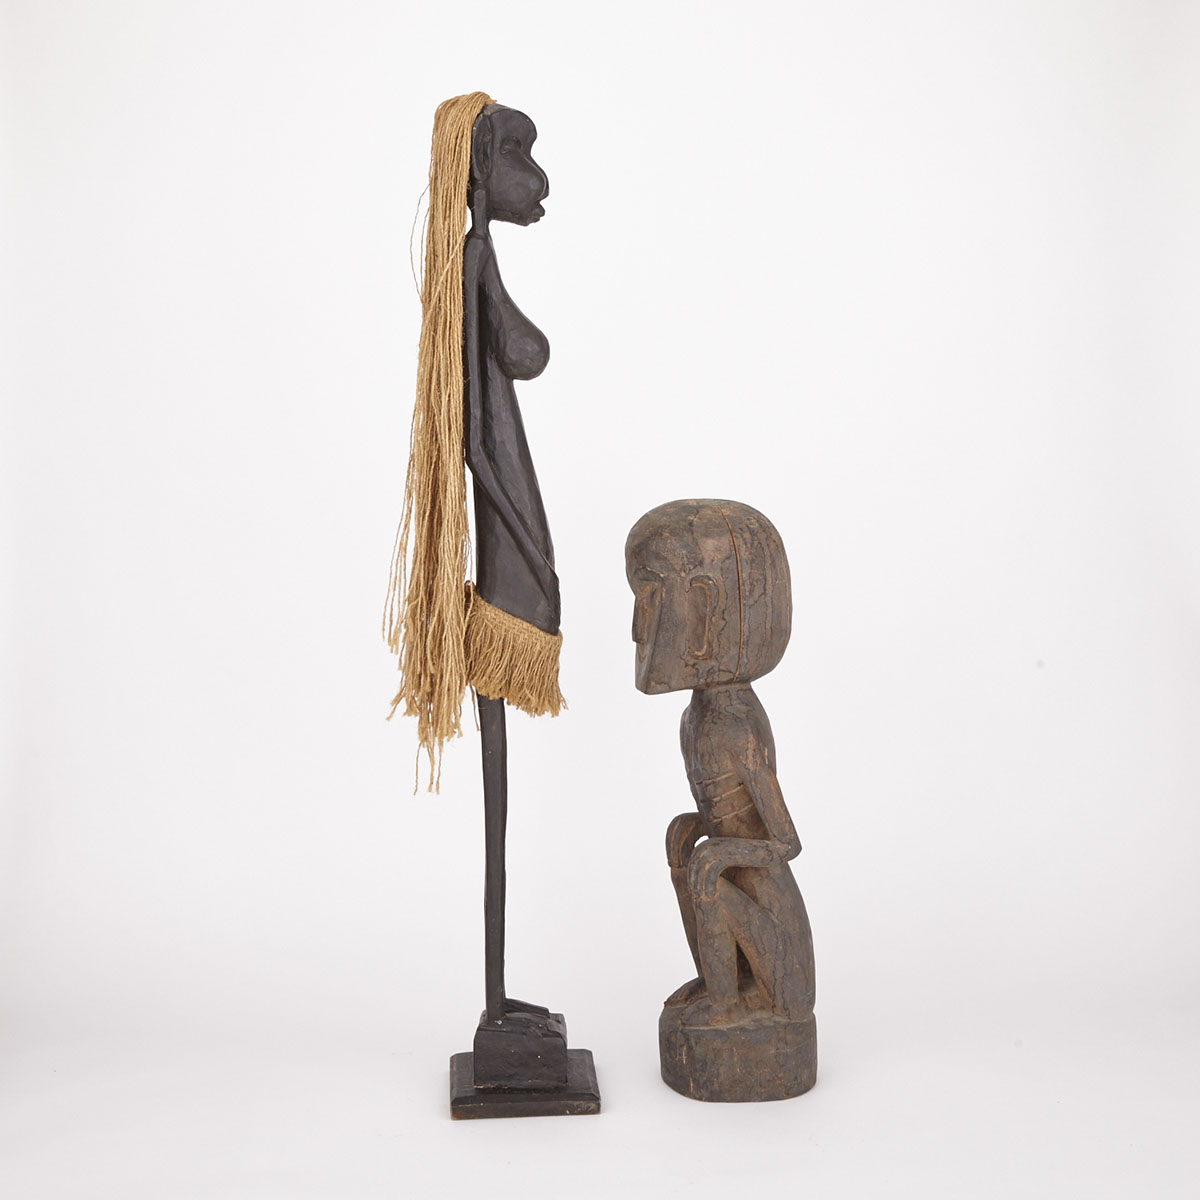 Carved Wood Male Fetish Figure together with a Carved Wood Female Figure with fiber hair and skirt, Africa, 20th/21st century